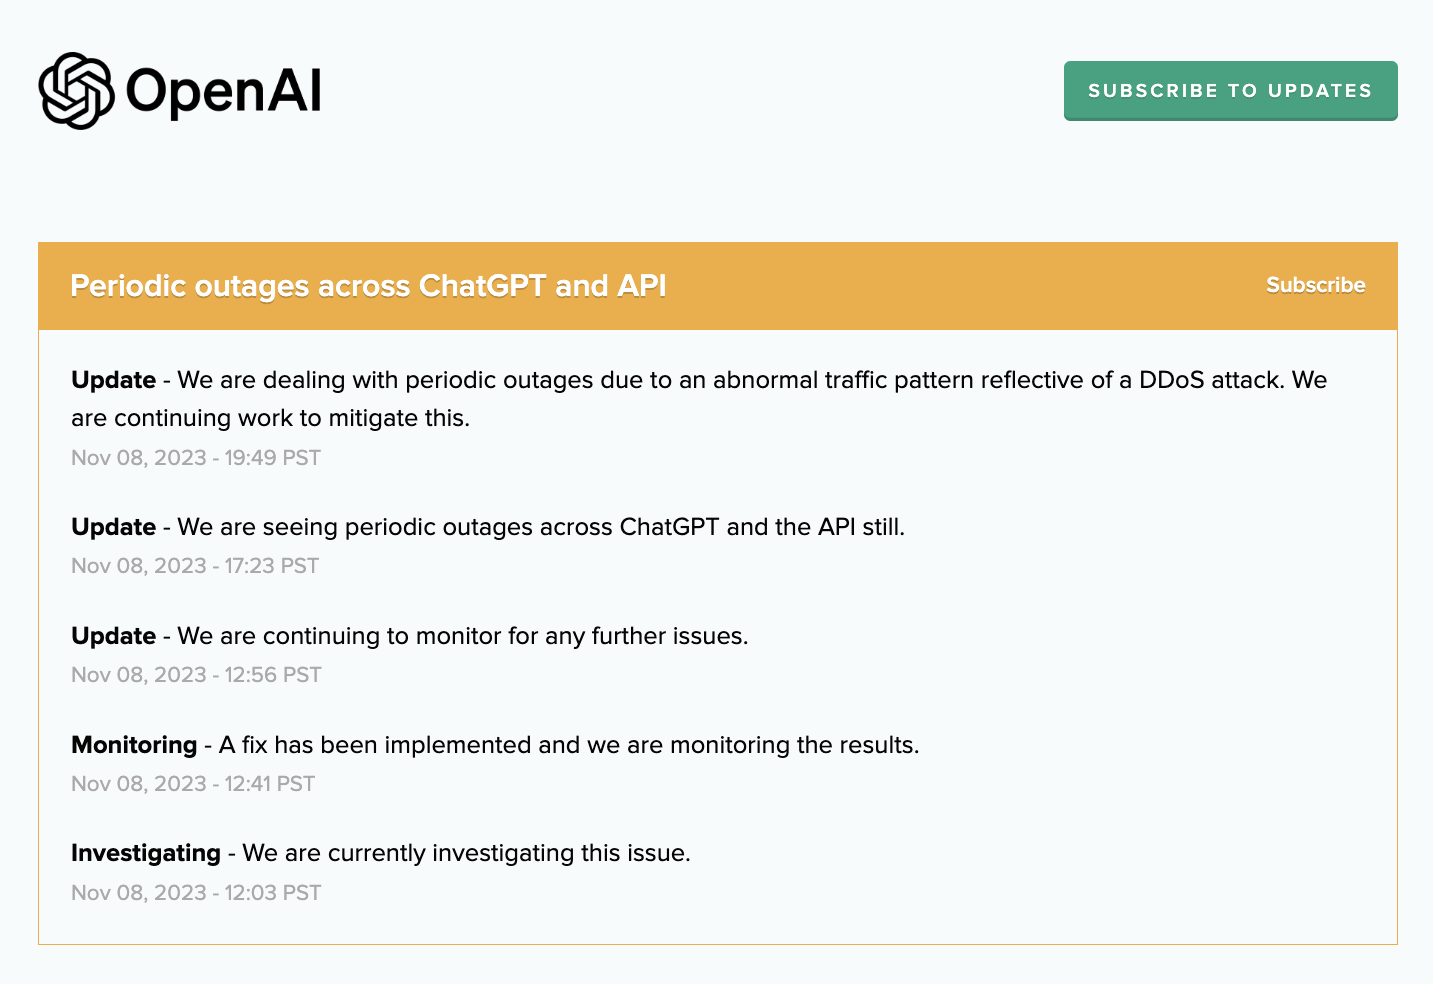 OpenAI resolves periodic ChatGPT and API outages caused by DDoS attacks